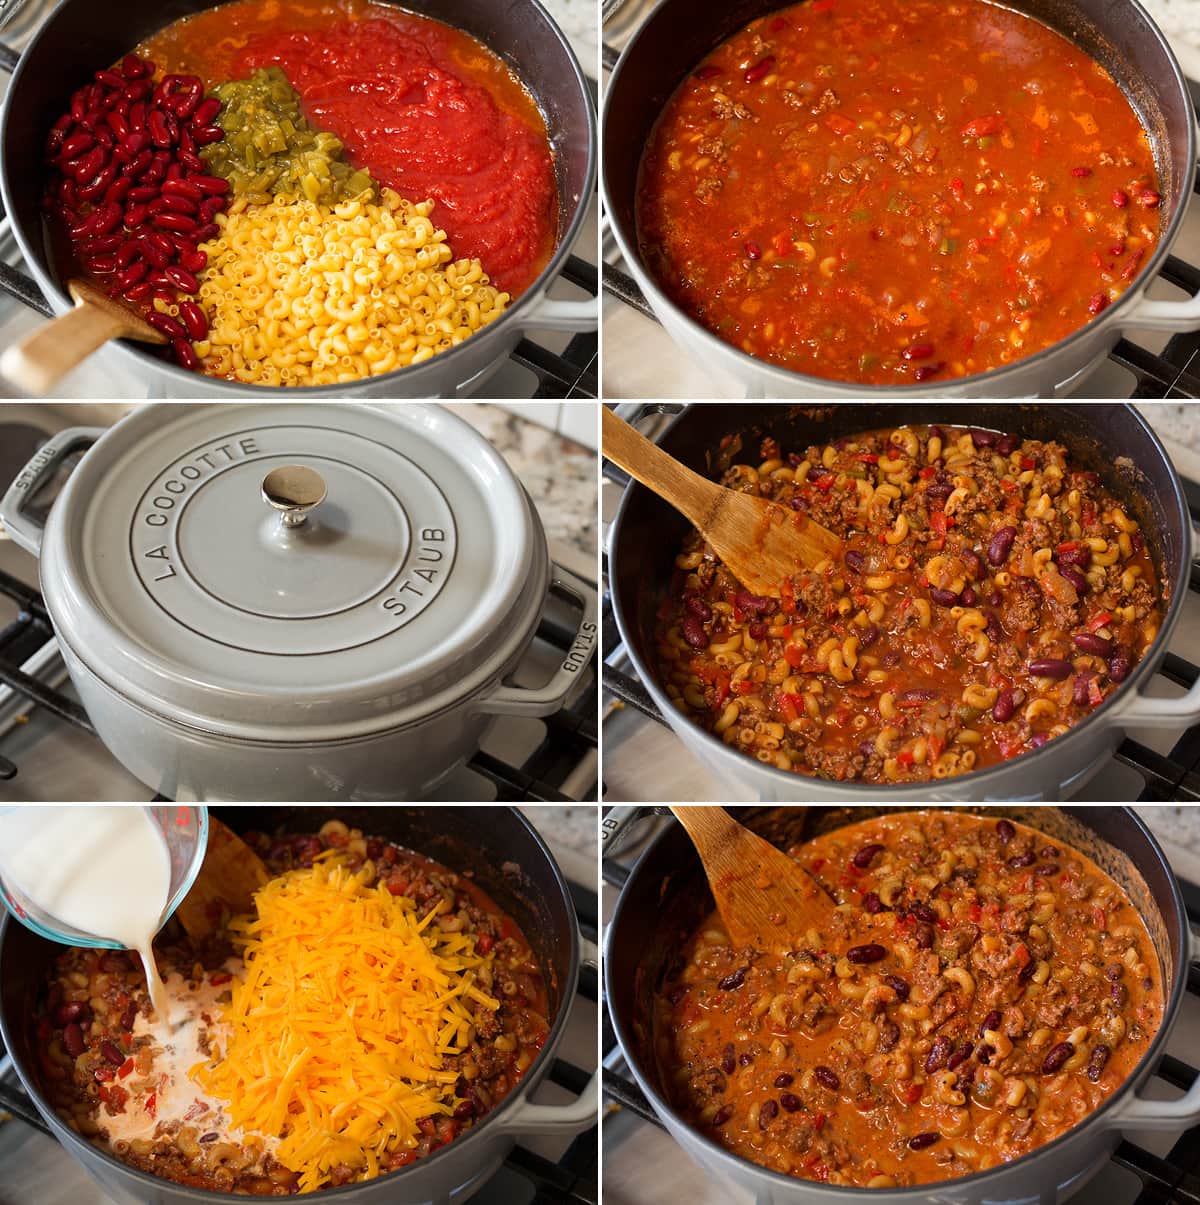 Continuous steps showing how to simmer the ingredients of macaroni and chili in the pot.